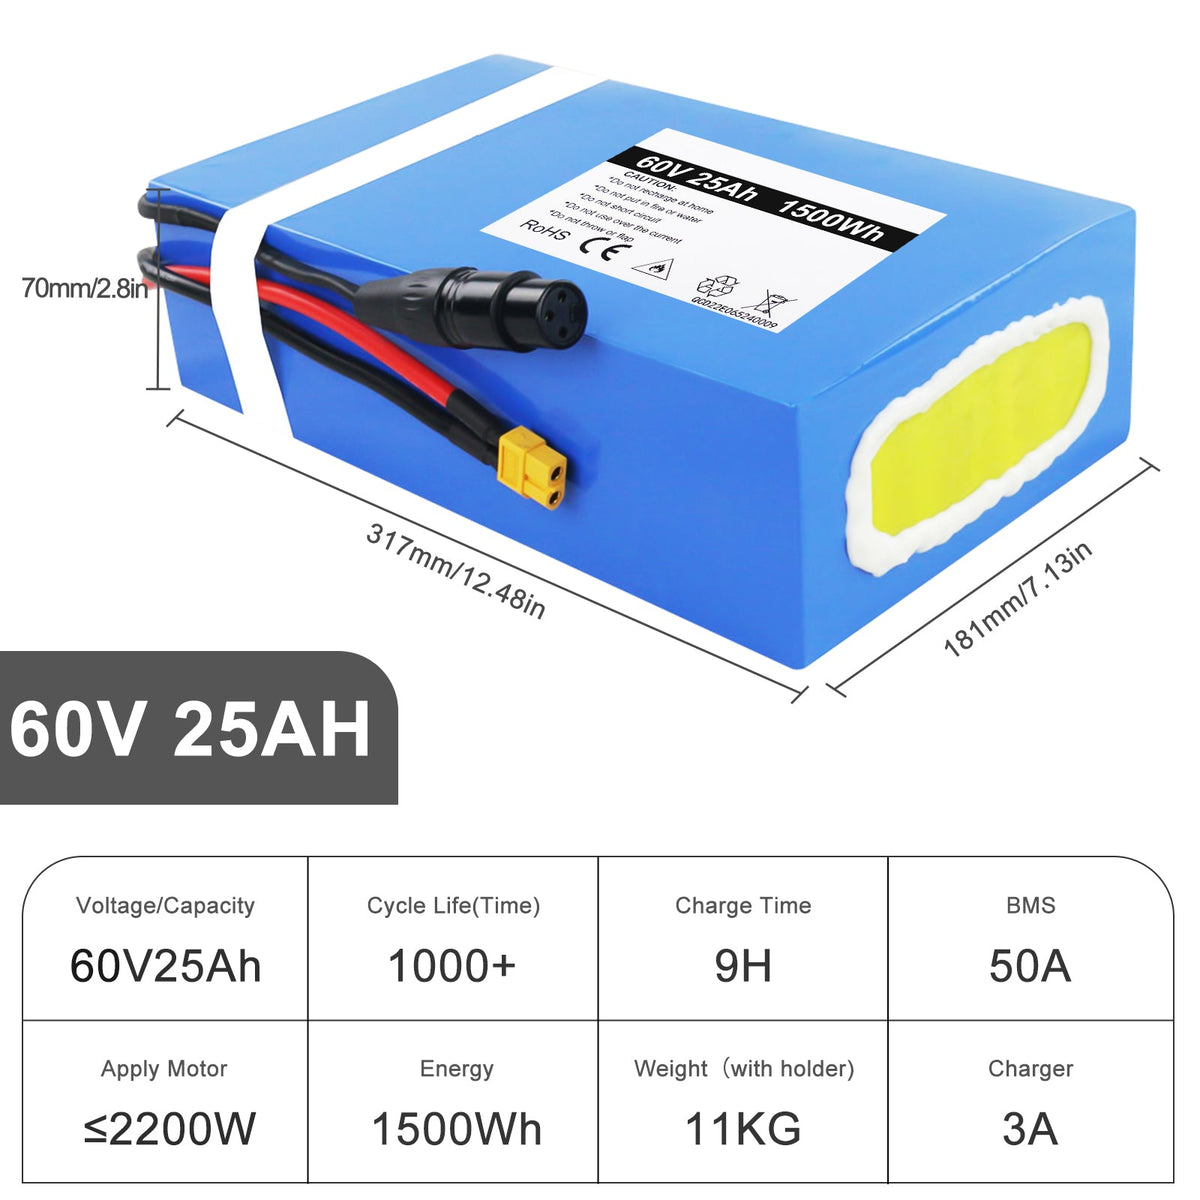 60V 25AH Ebike Lithium Battery for 2200W Motor, Waterproof lithium Pack for Motercyckle, Go-kart, Scooter